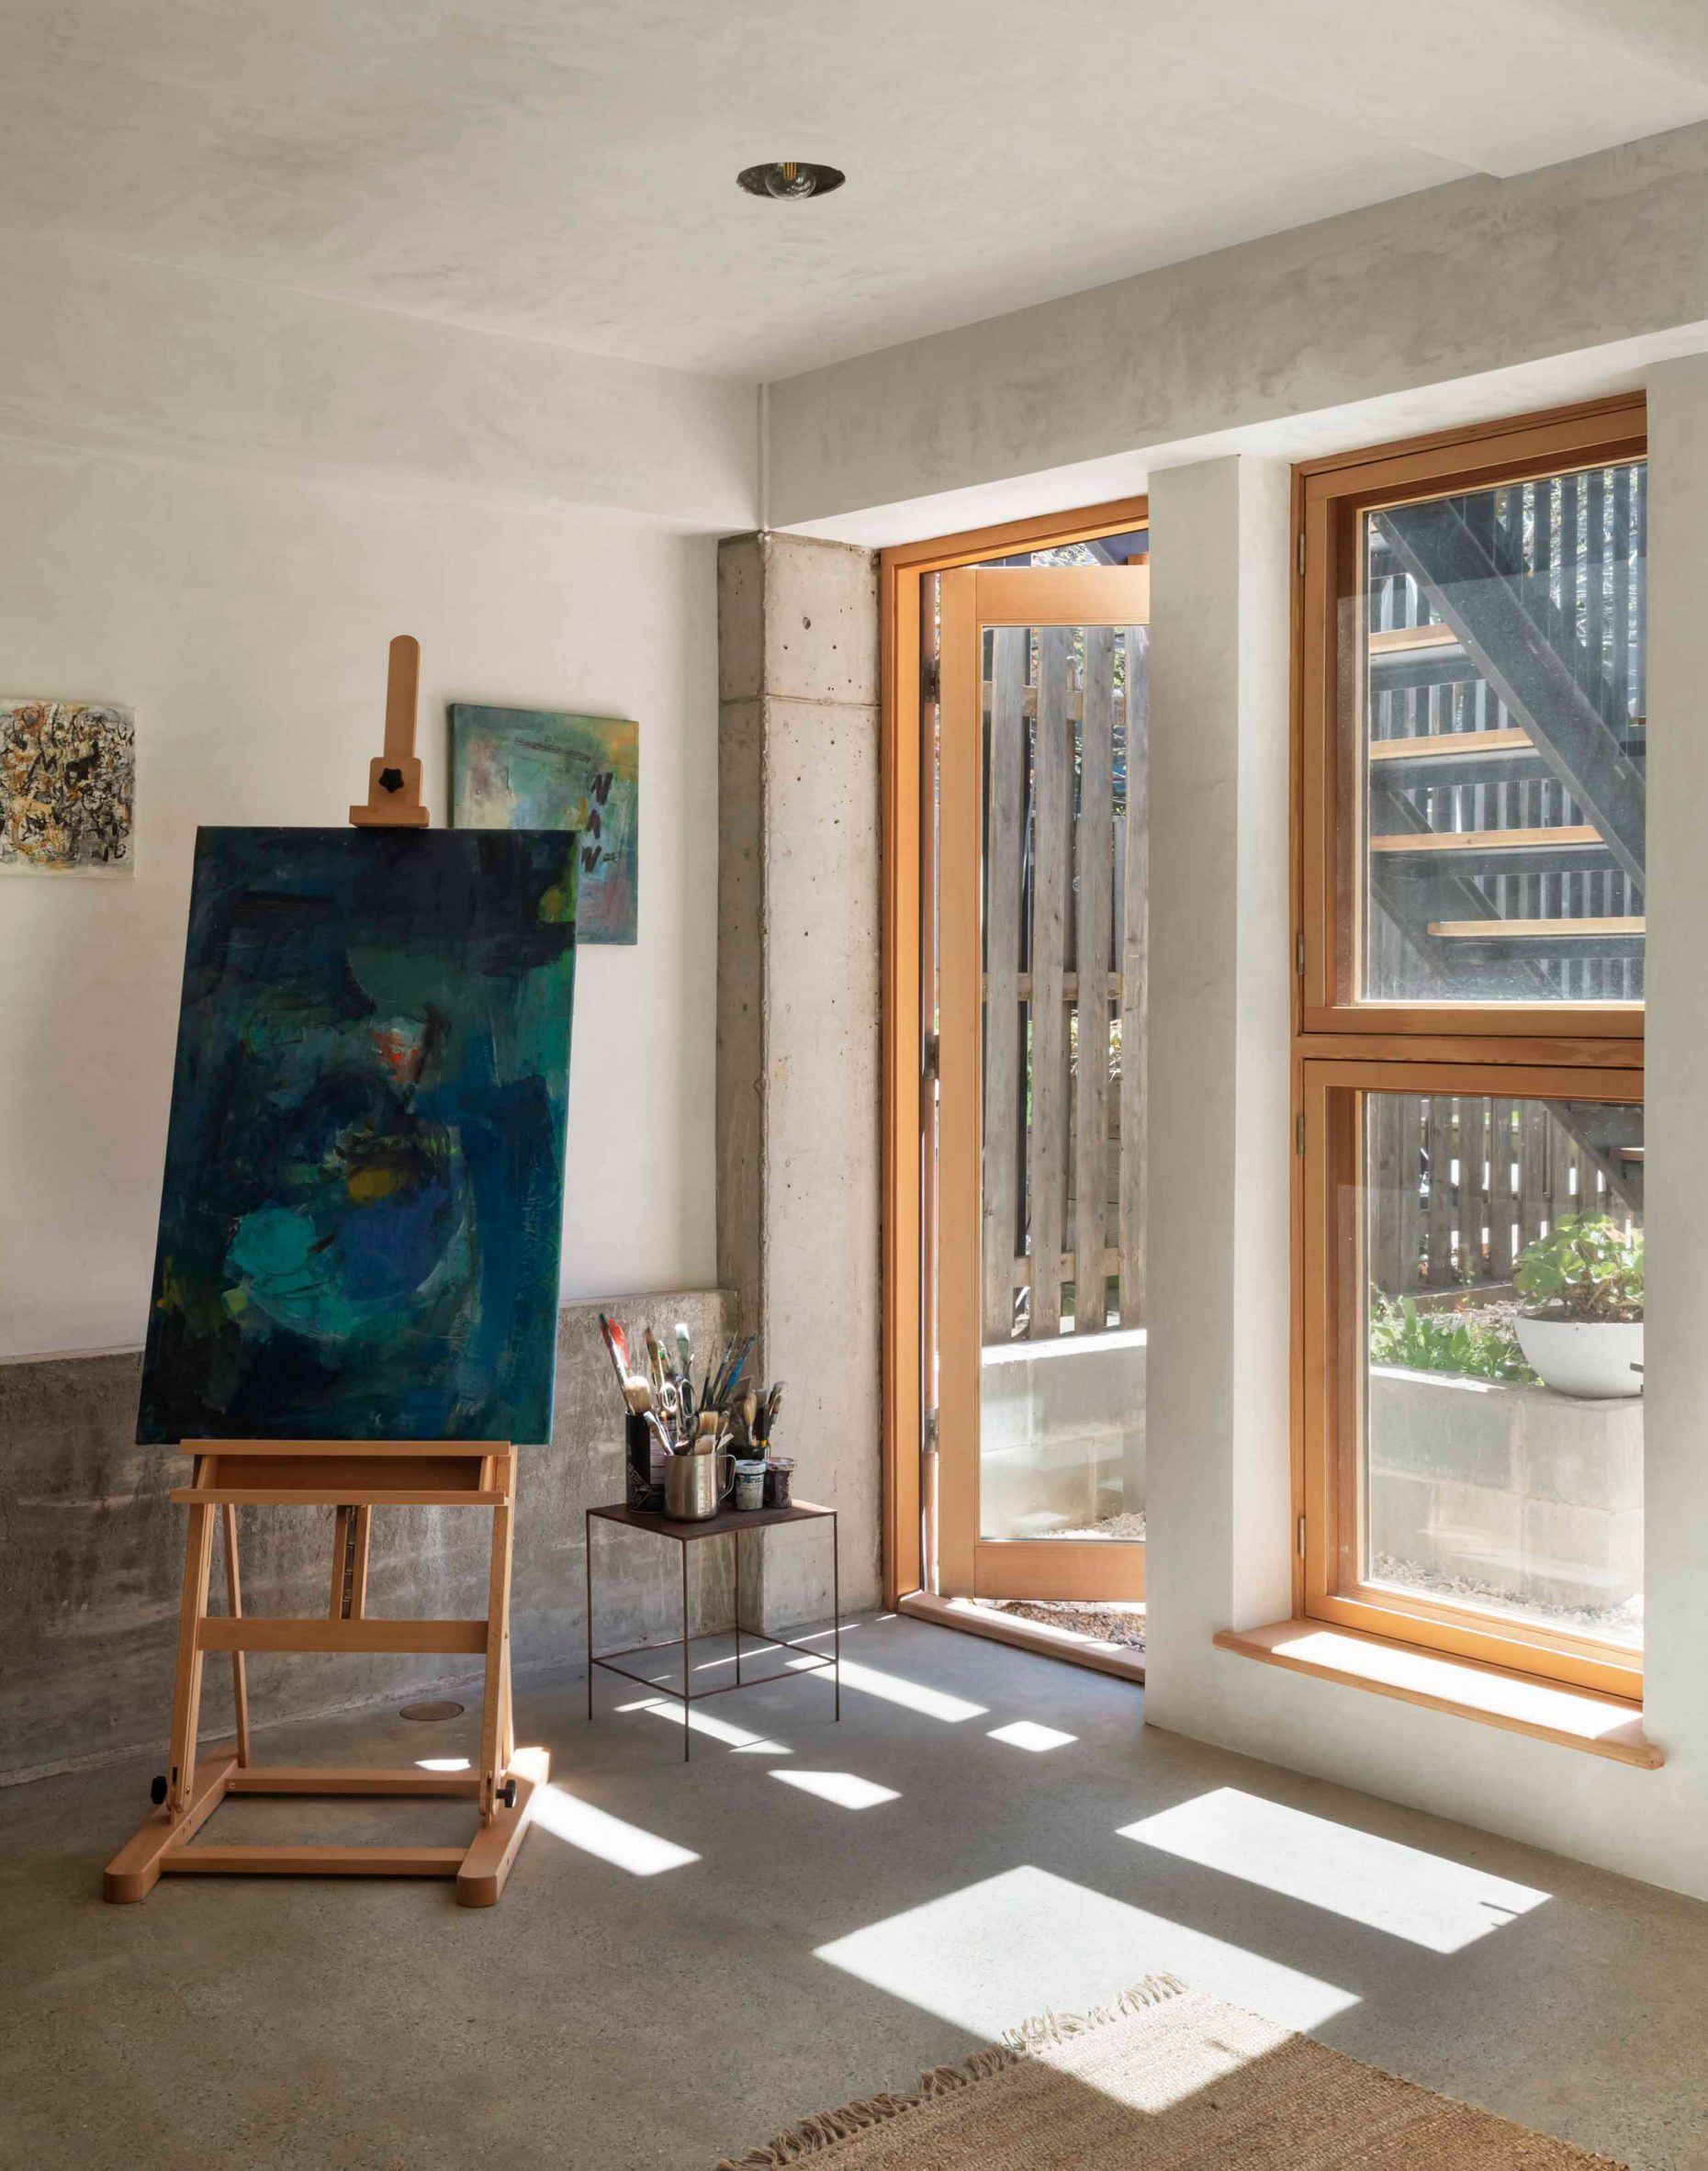 Flexible art studio with concrete flooring and large rectilinear windows